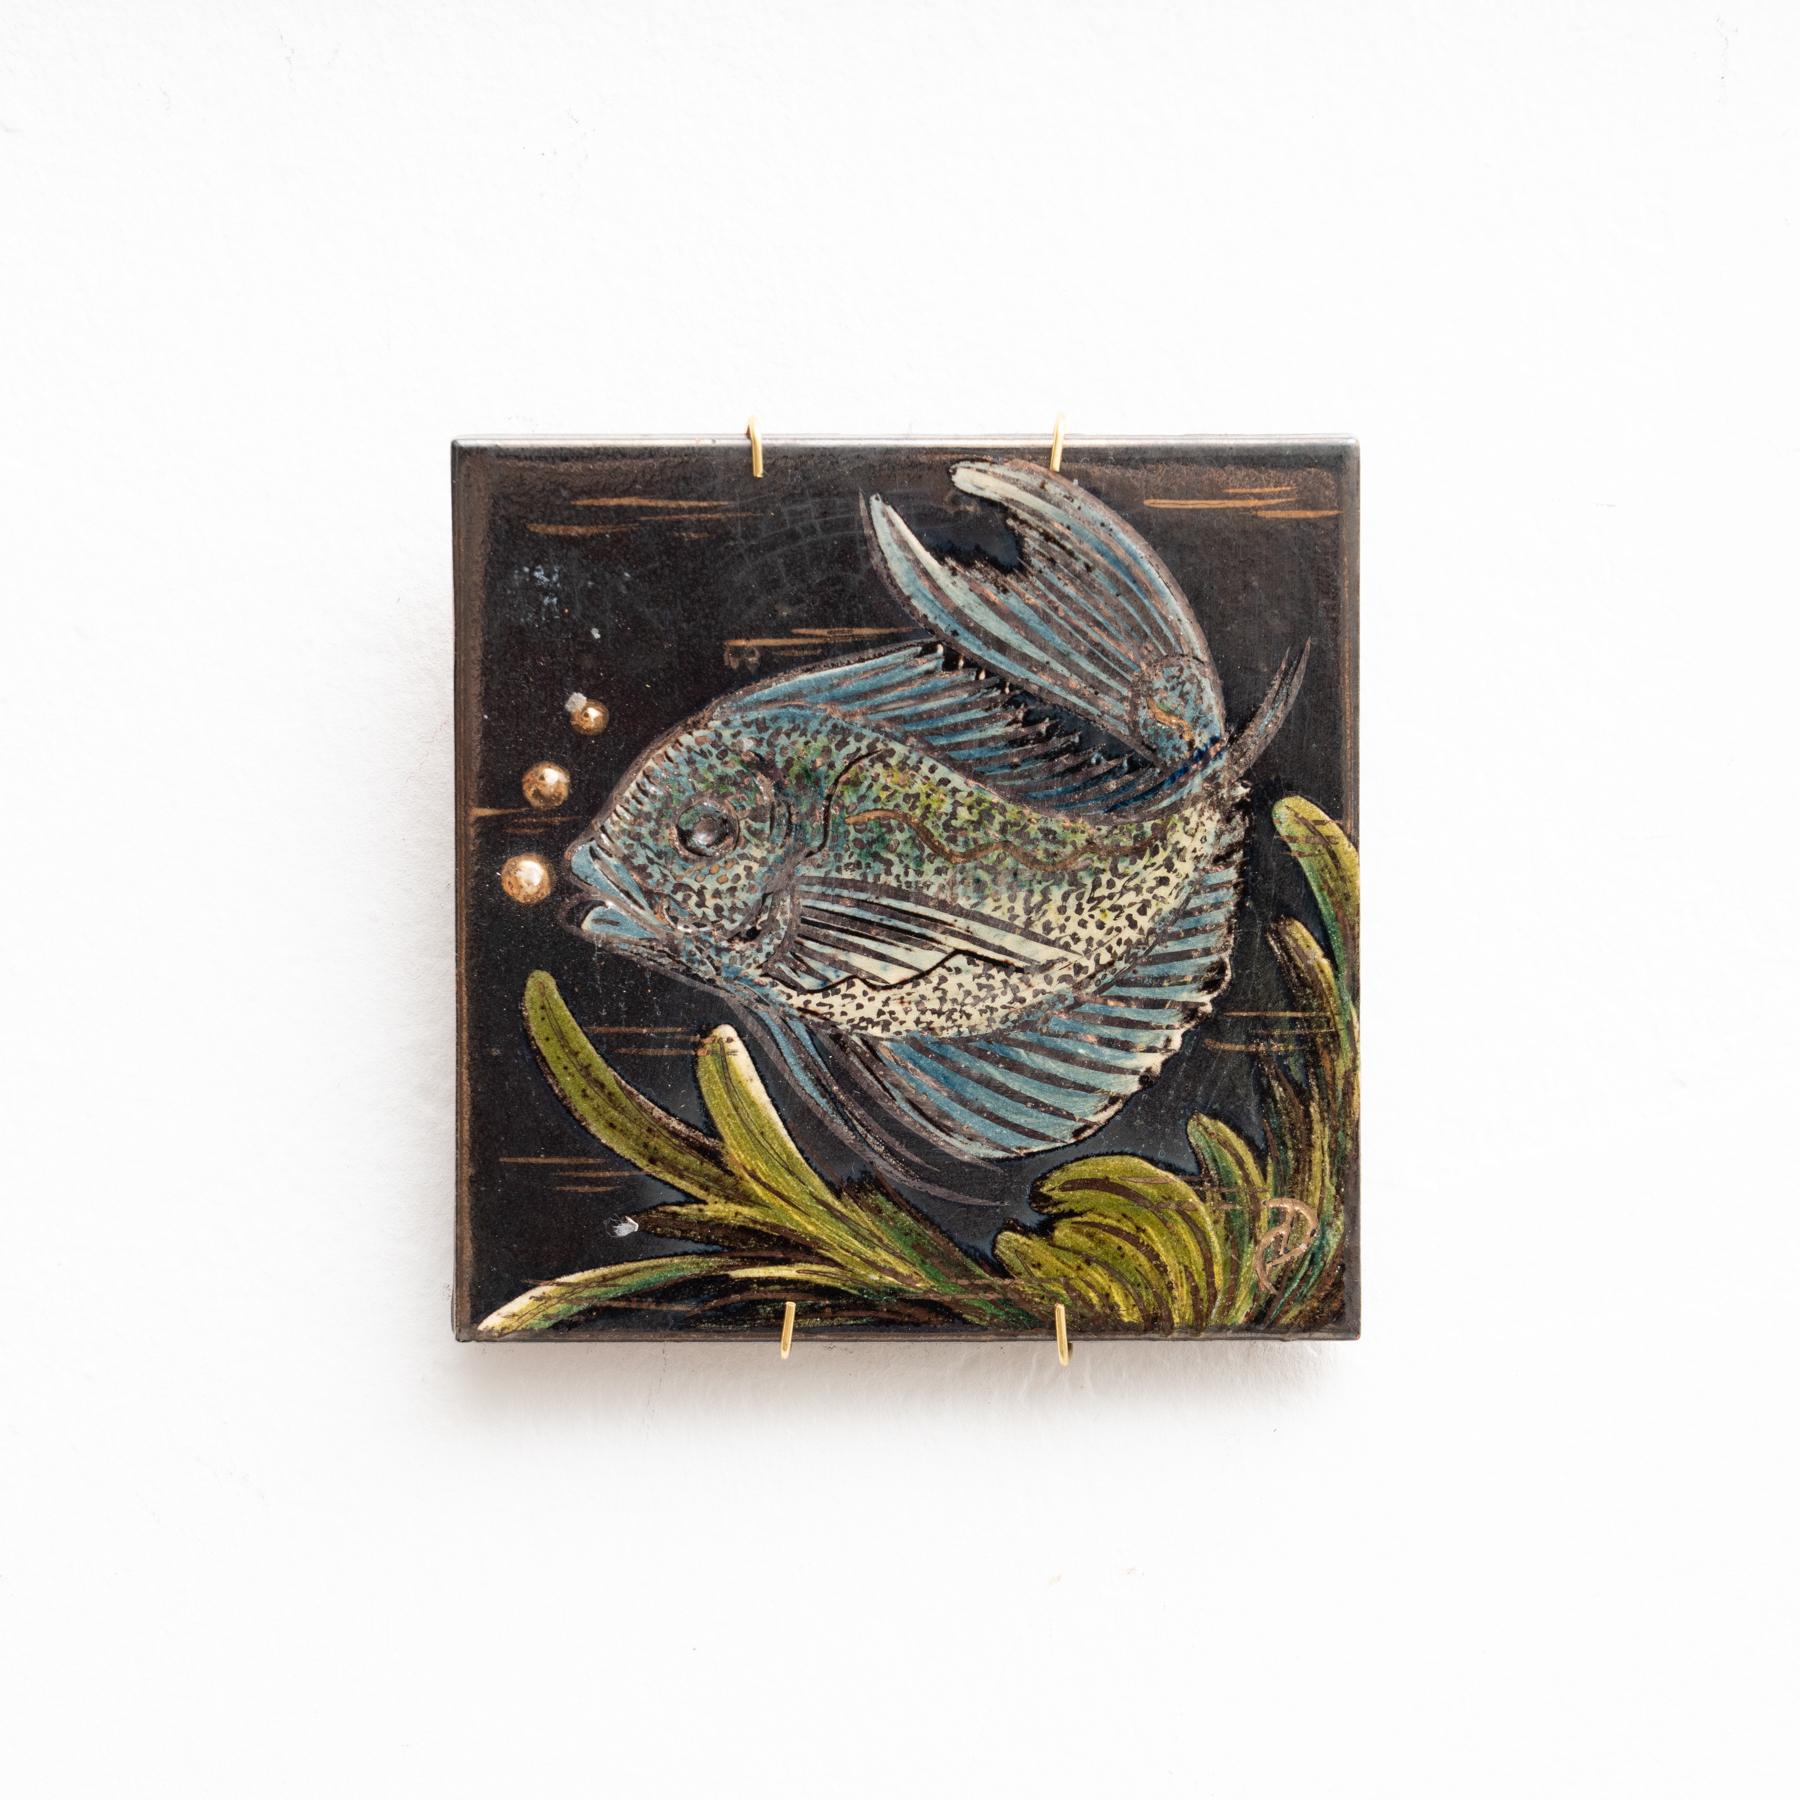 Ceramic hand painted artwork of a fish by Catalan artist Diaz Costa, circa 1960.
Signed.

In original condition, with minor wear consistent of age and use, preserving a beautiul patina.